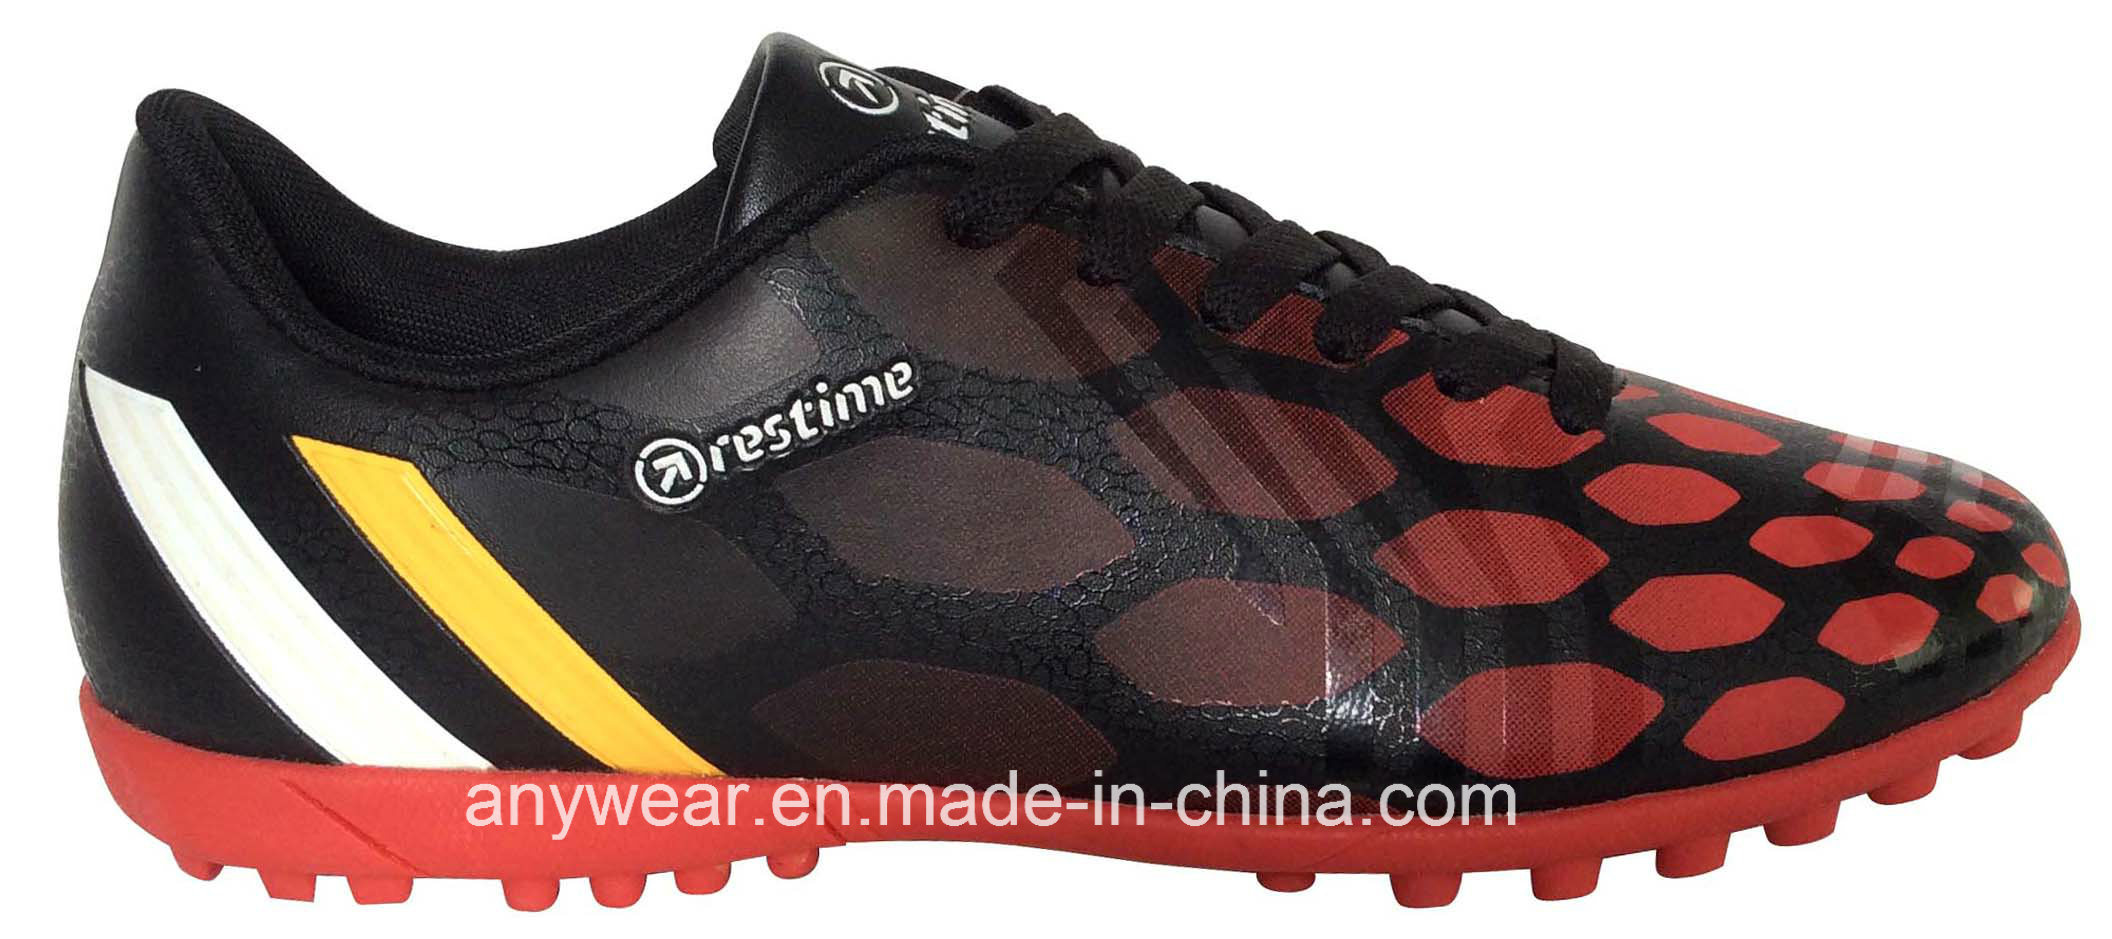 China Men Sports Outdoor Soccer Football Shoes (PM015101)